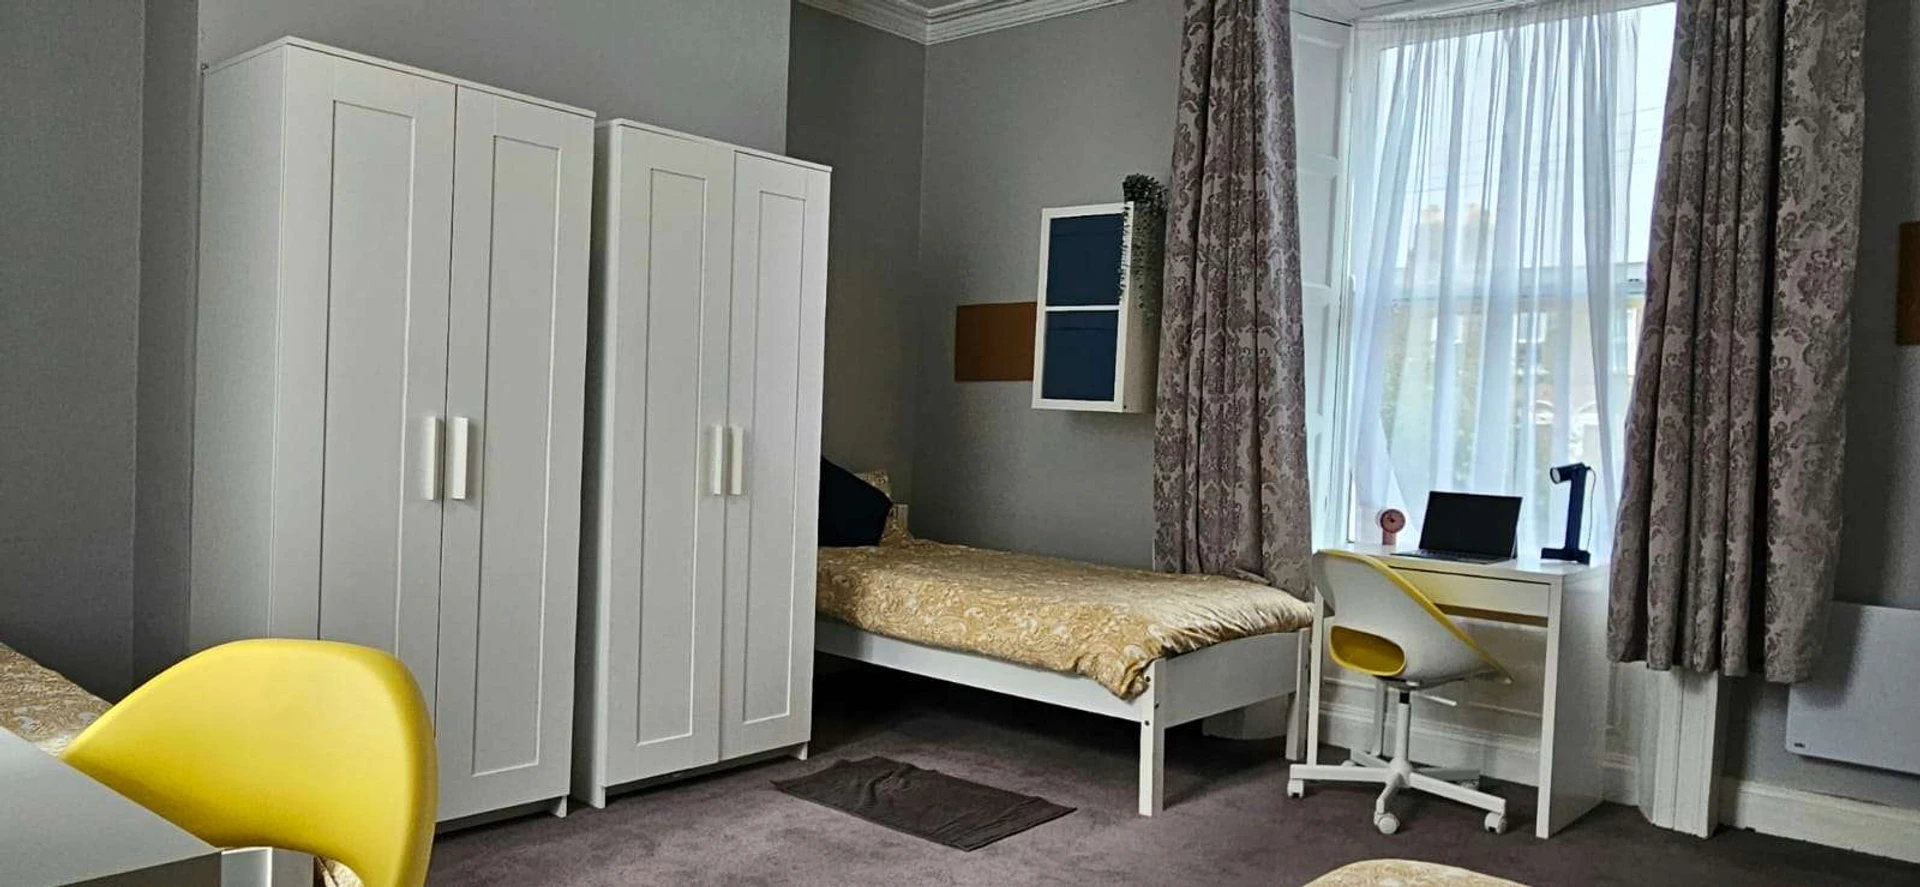 Room for rent in a shared flat in dublin